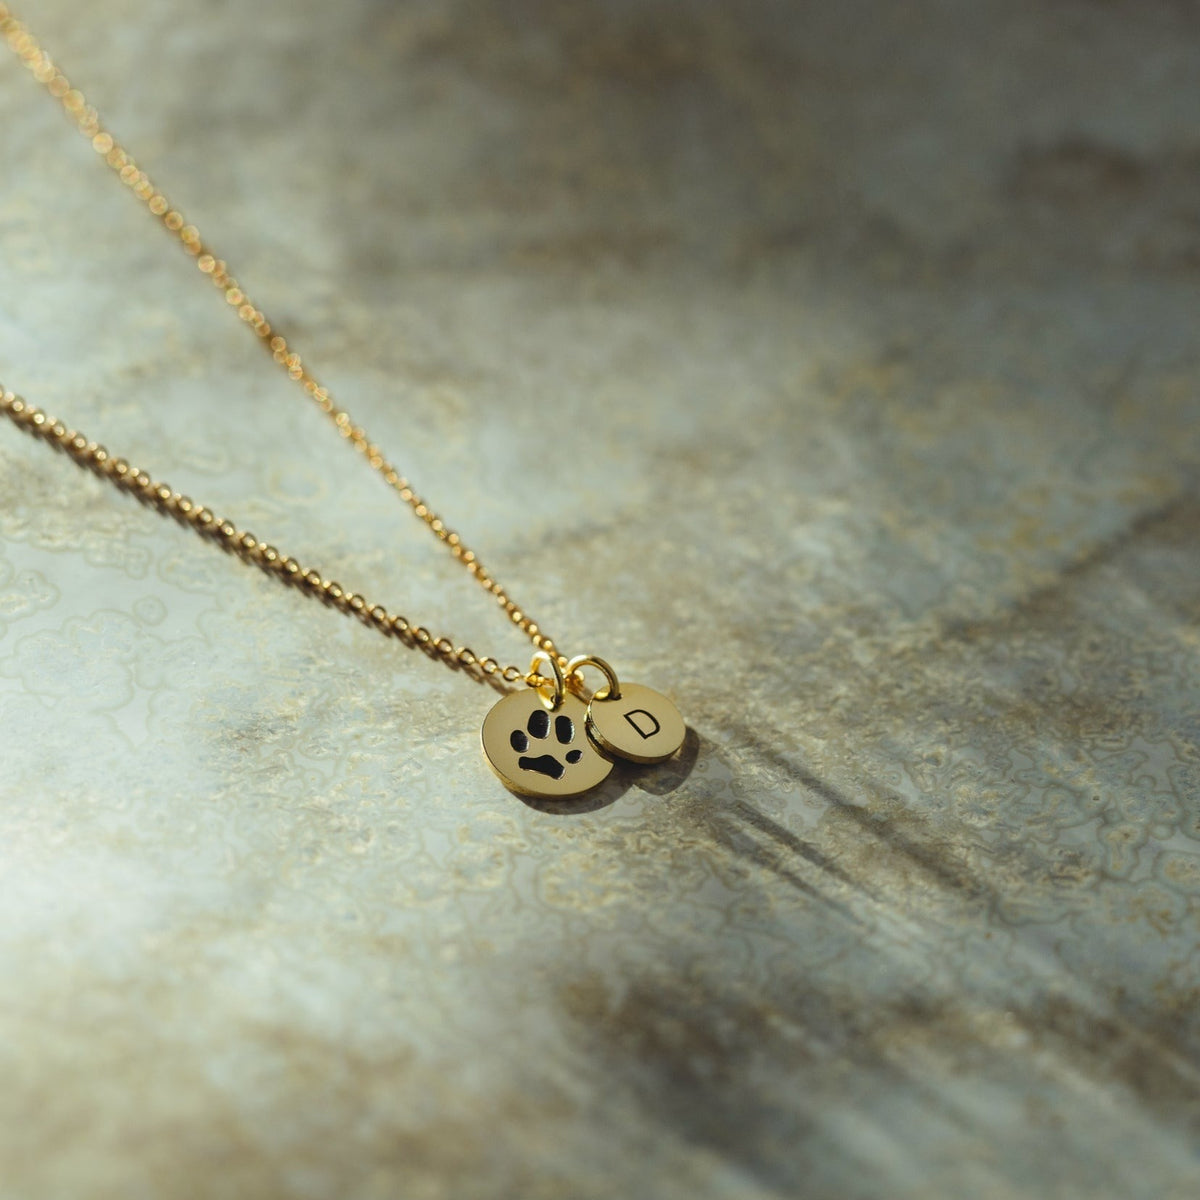 Bronze Paw Print Necklace with Gold Fill 18 Inch Chain